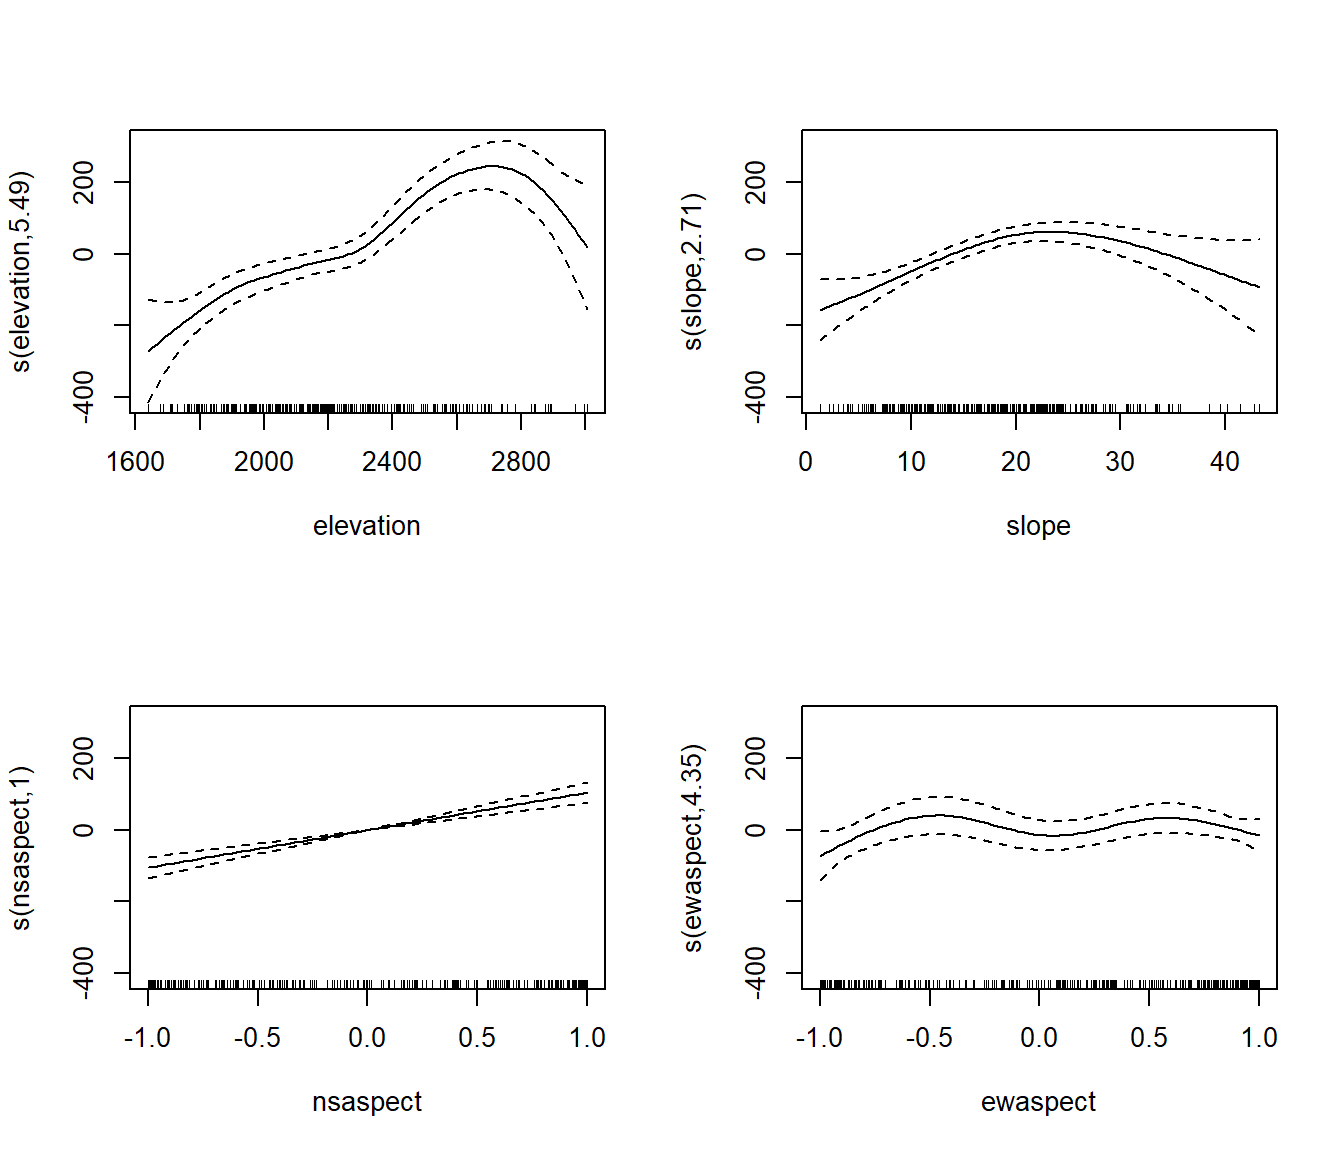 Partial regression plots for the relationships between topographic indices and fire severity.